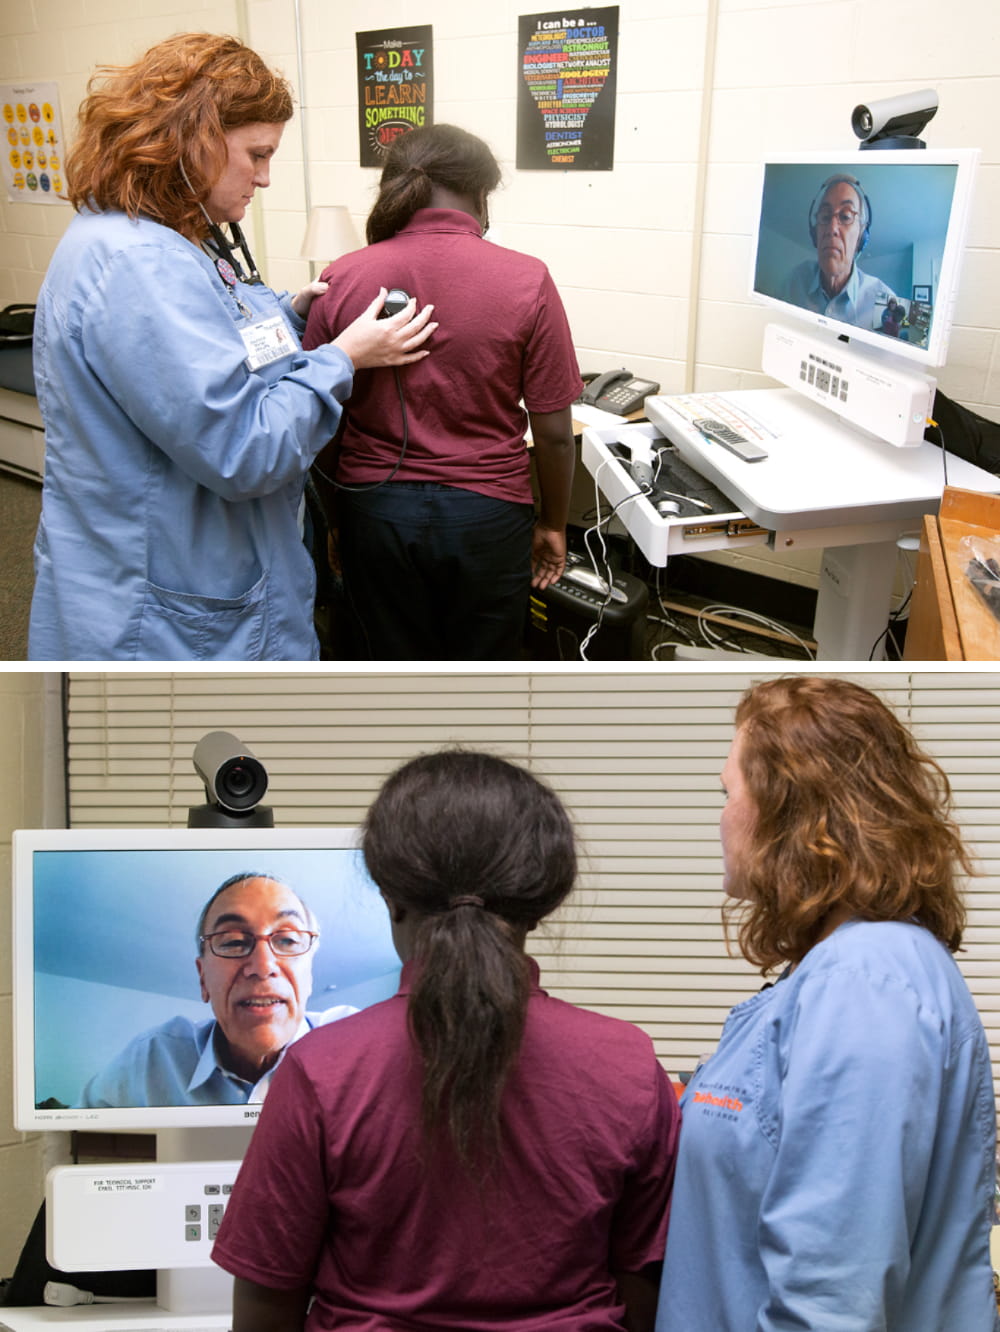 Two photos stacked vertically, the top shows a nurse using a stethoscope on a student patient and the bottom shows the nurse and student patient speaking with a doctor via a Telehealth cart